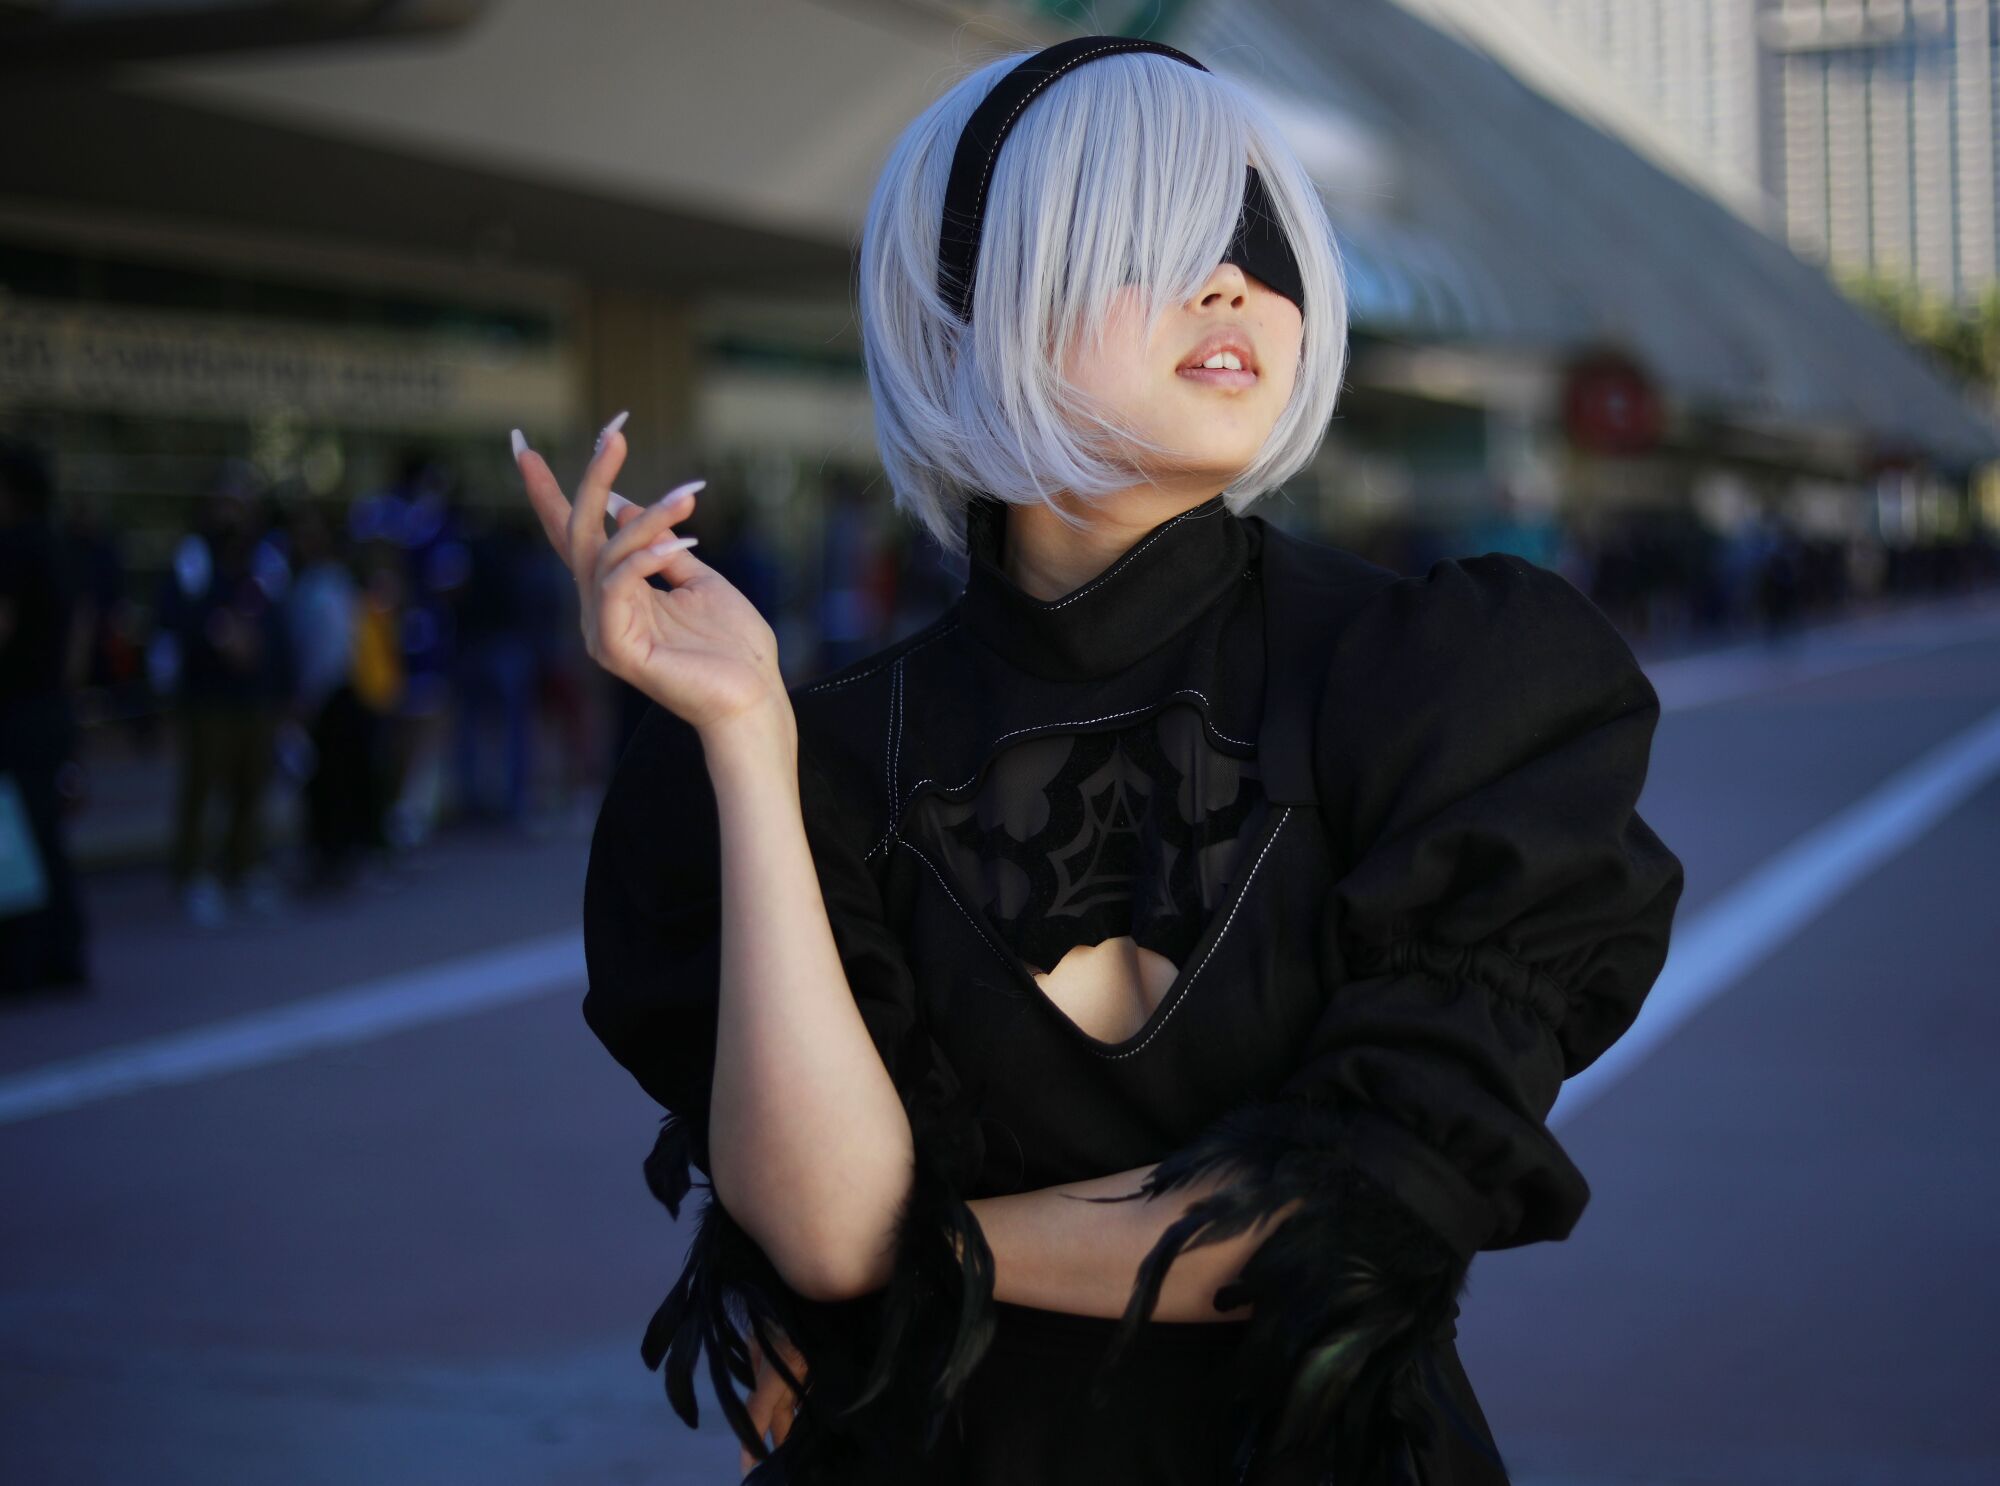 Mona You of San Mateo dressed as 2B from the video game NieR:Automata at Comic-Con Special Edition.